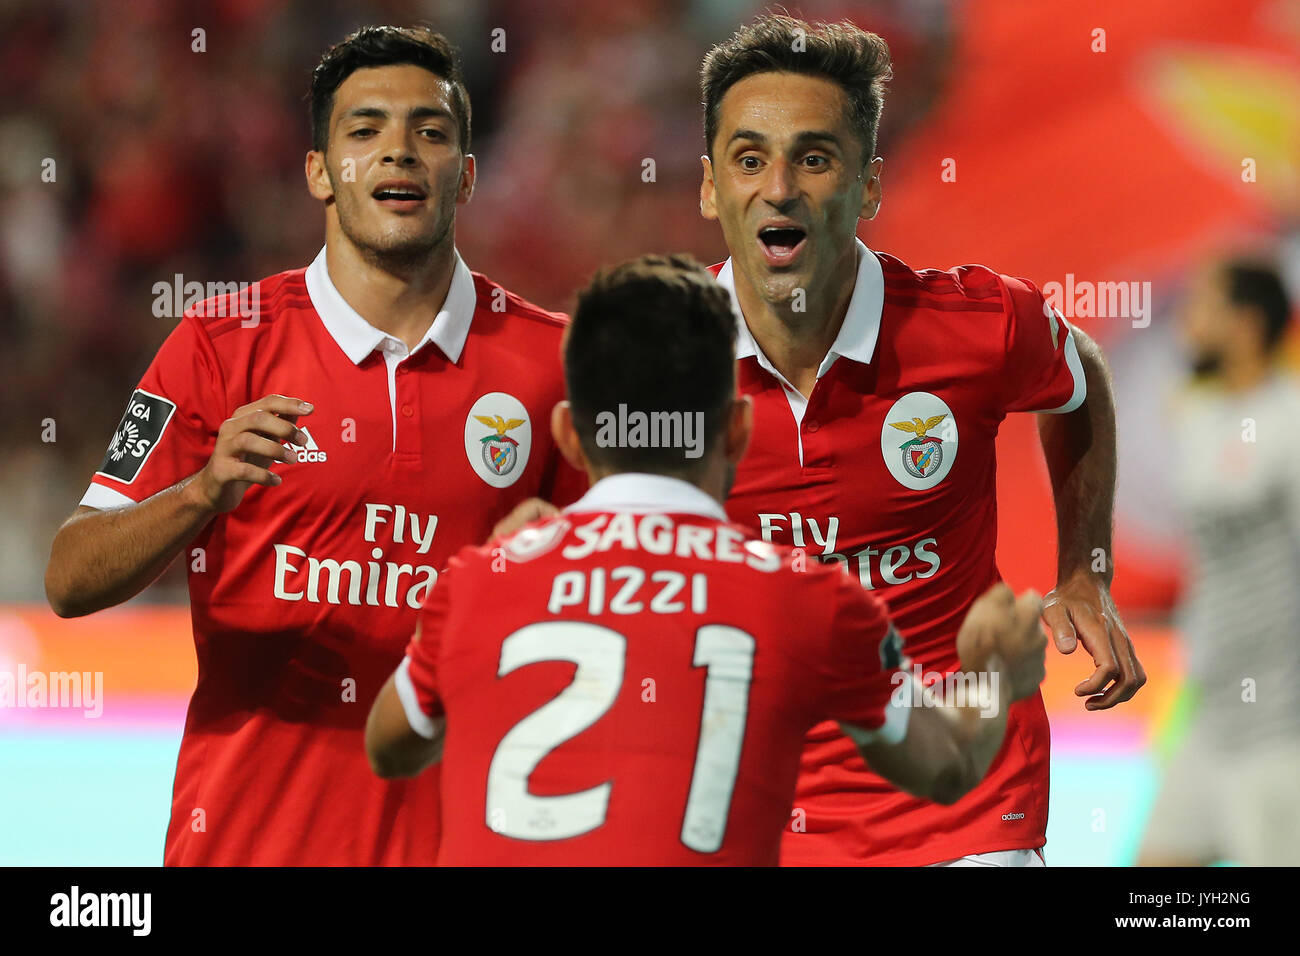 Lisbon, Portugal. 19th Aug, 2017. Benfica's forward Jonas from Brazil (R)  celebrating with Benfica's midfielder Pizzi from Portugal after scoring a  goal during the Premier League 2017/18 match between SL Benfica v